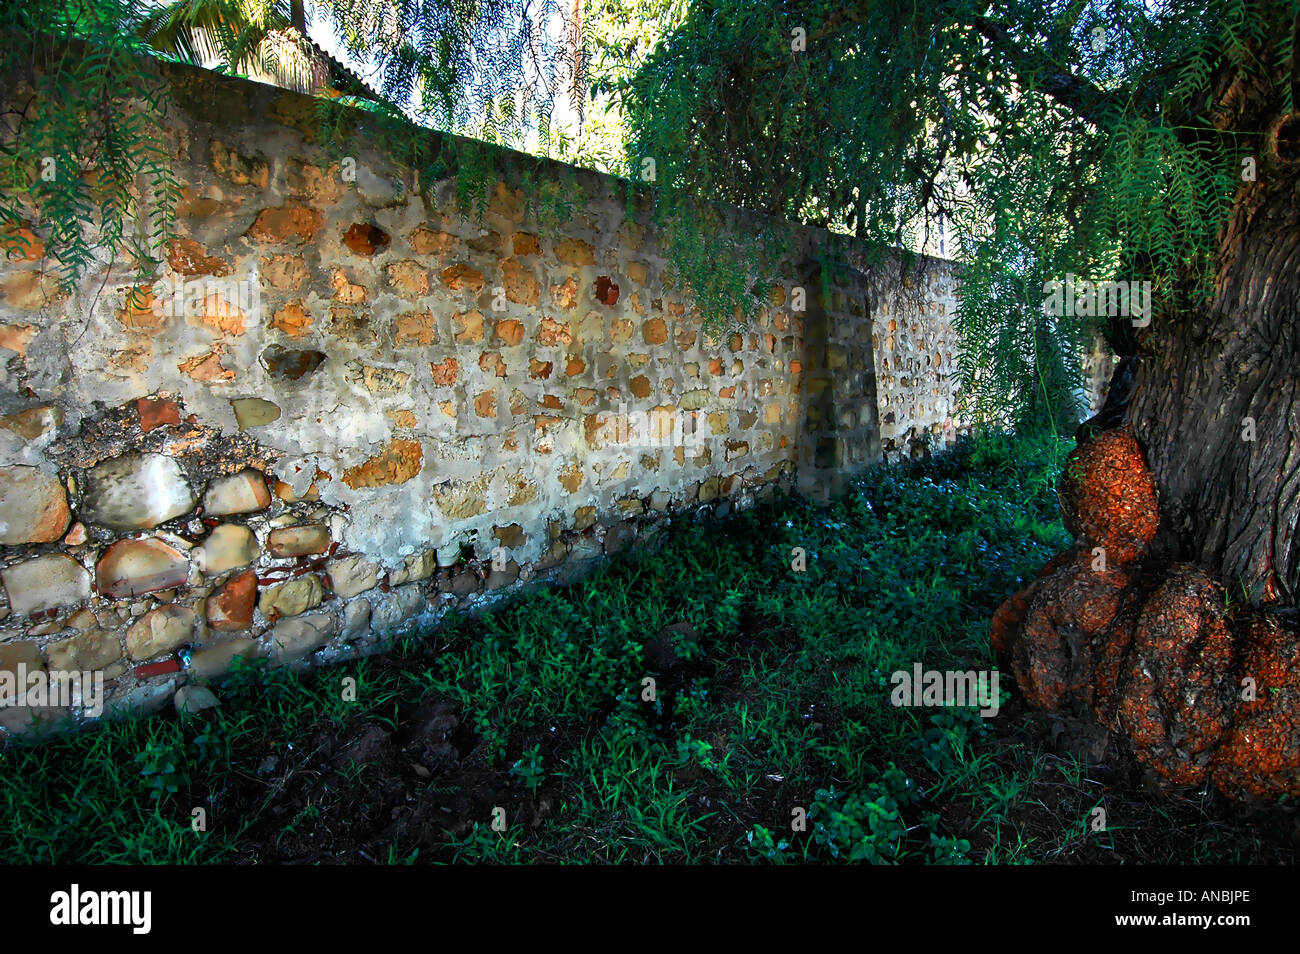 Old Stone Garden Wall In The Shade Of An Ancient Tree Stock Photo